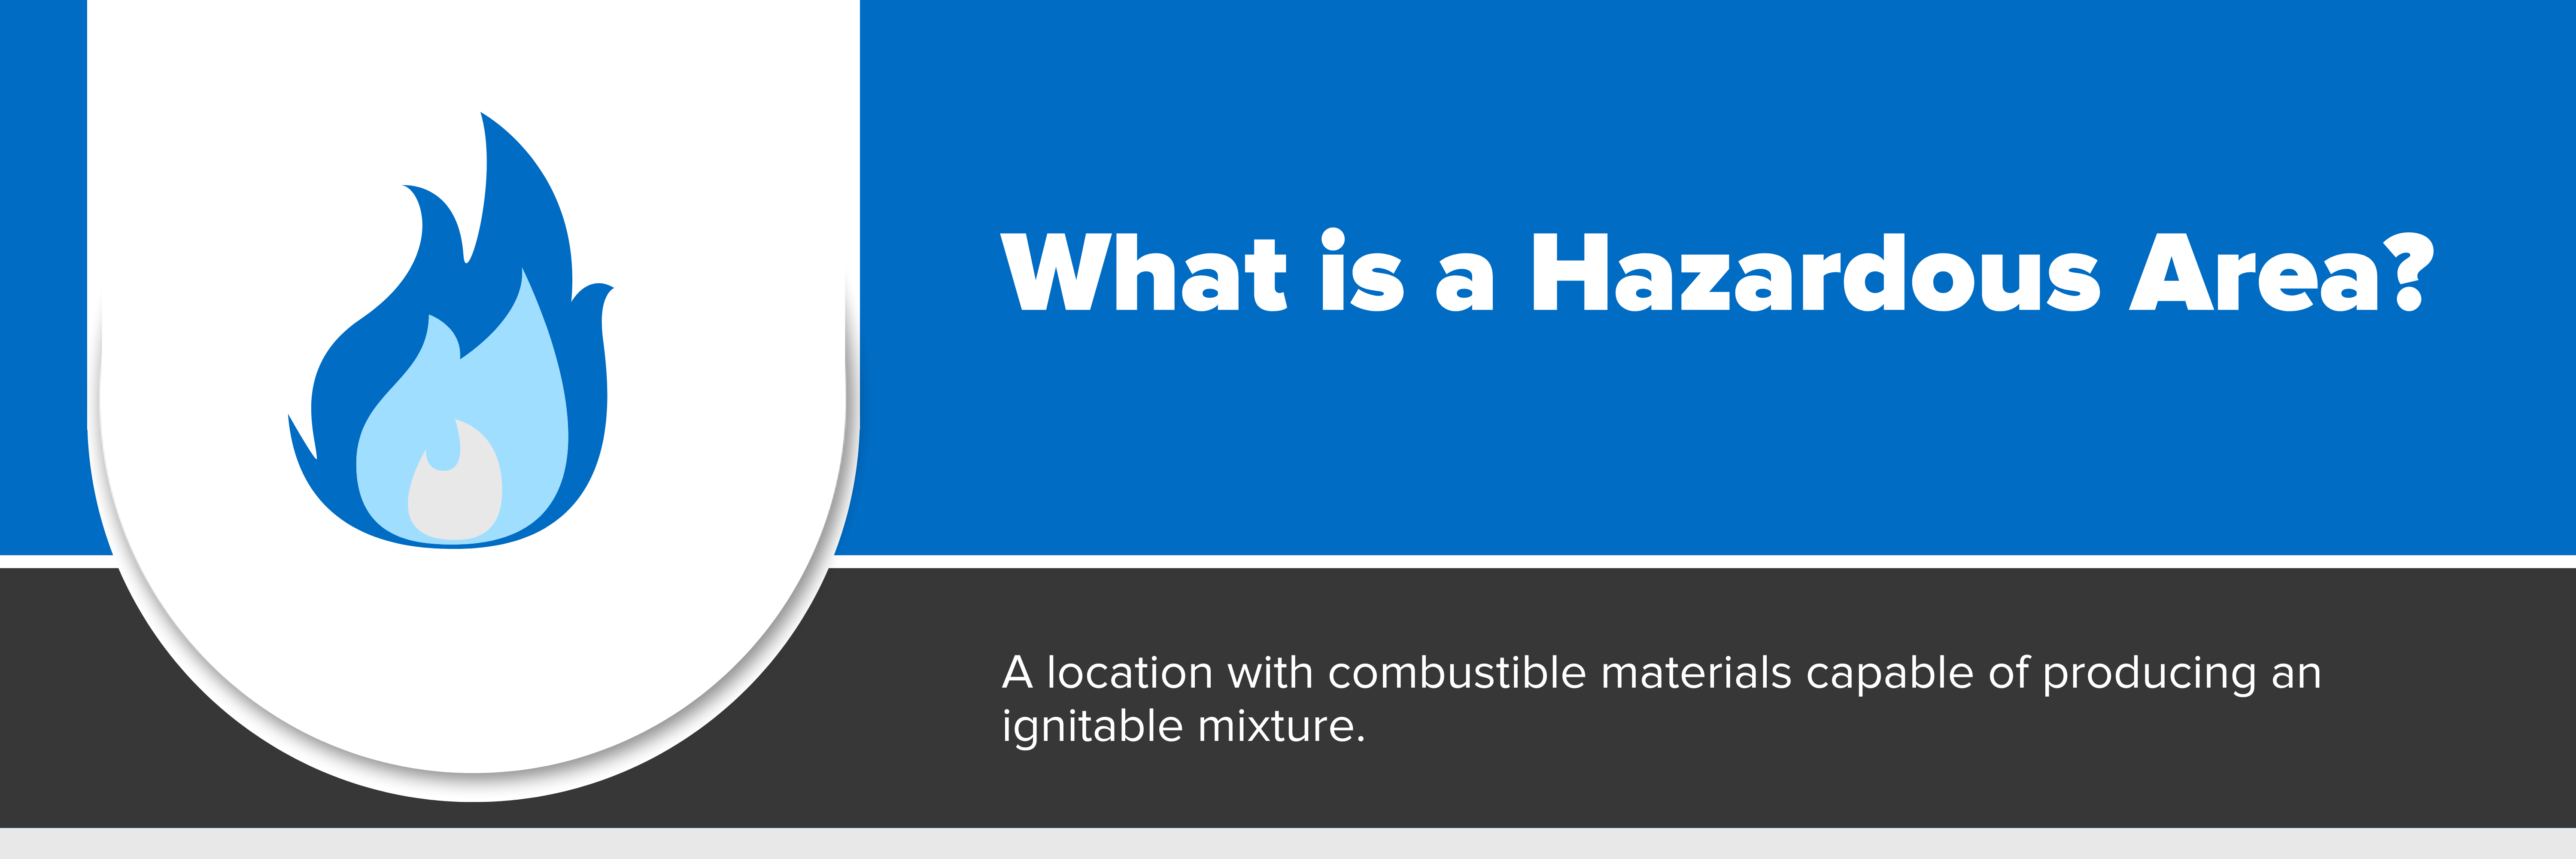 Header image with text "What is a Hazardous Area?"